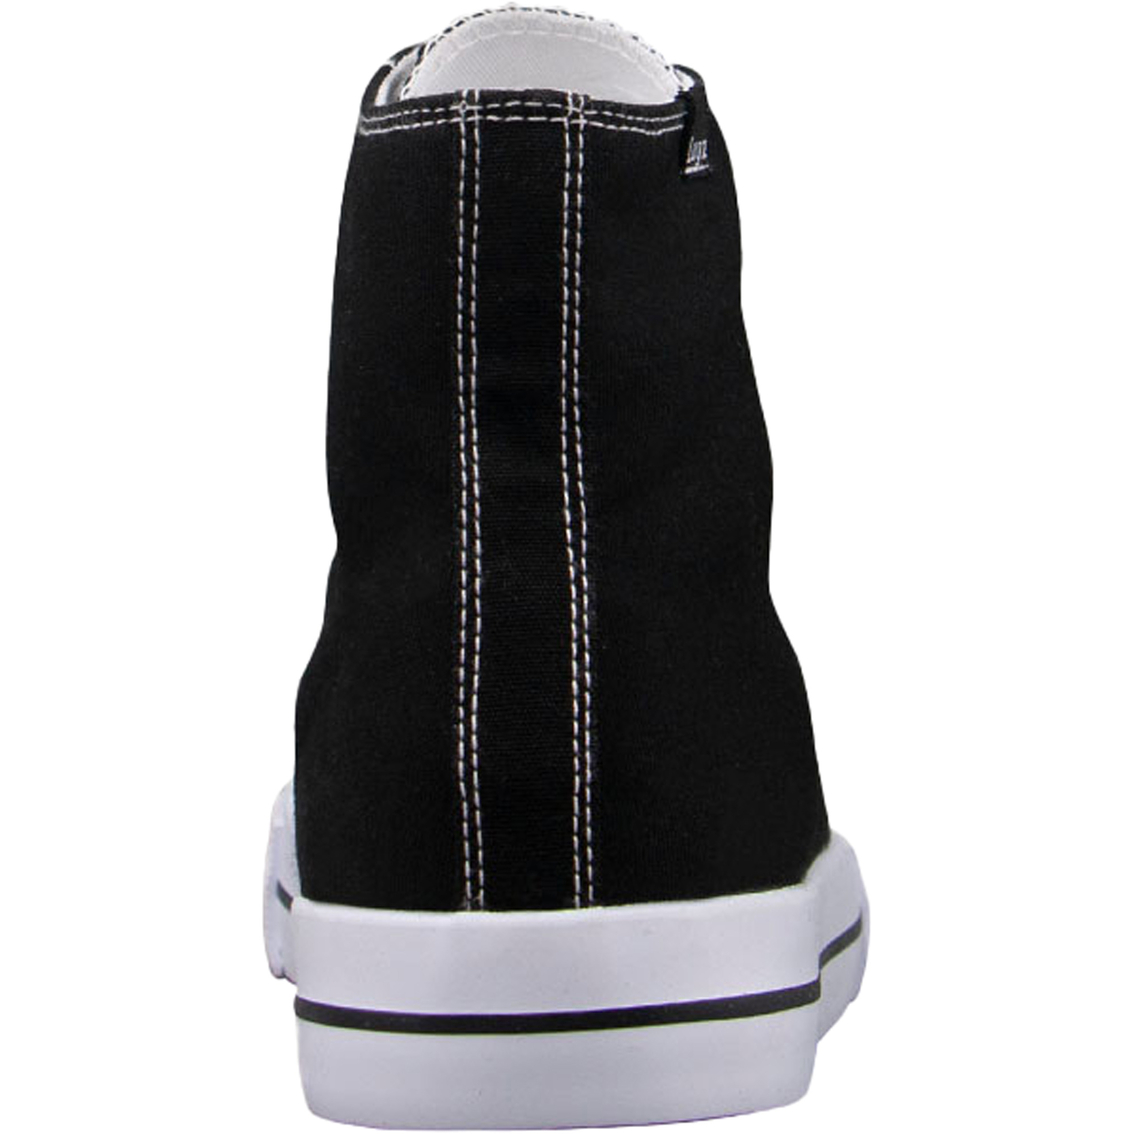 Lugz Men's Stagger Hi Sneakers - Image 7 of 7